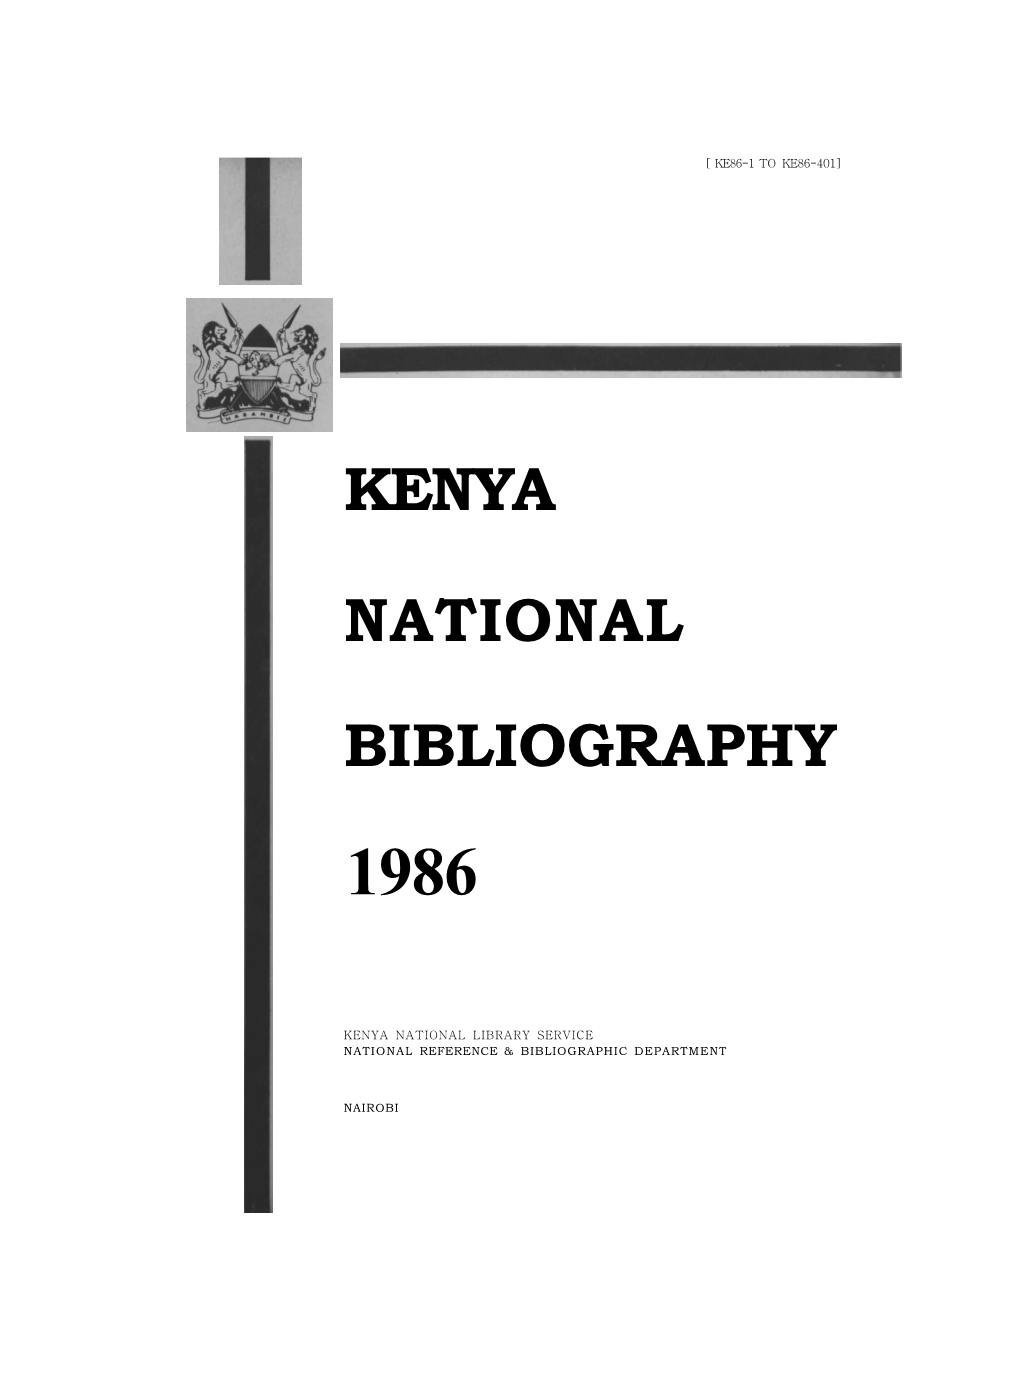 Kenya National Bibliography Is Compiled and Published By